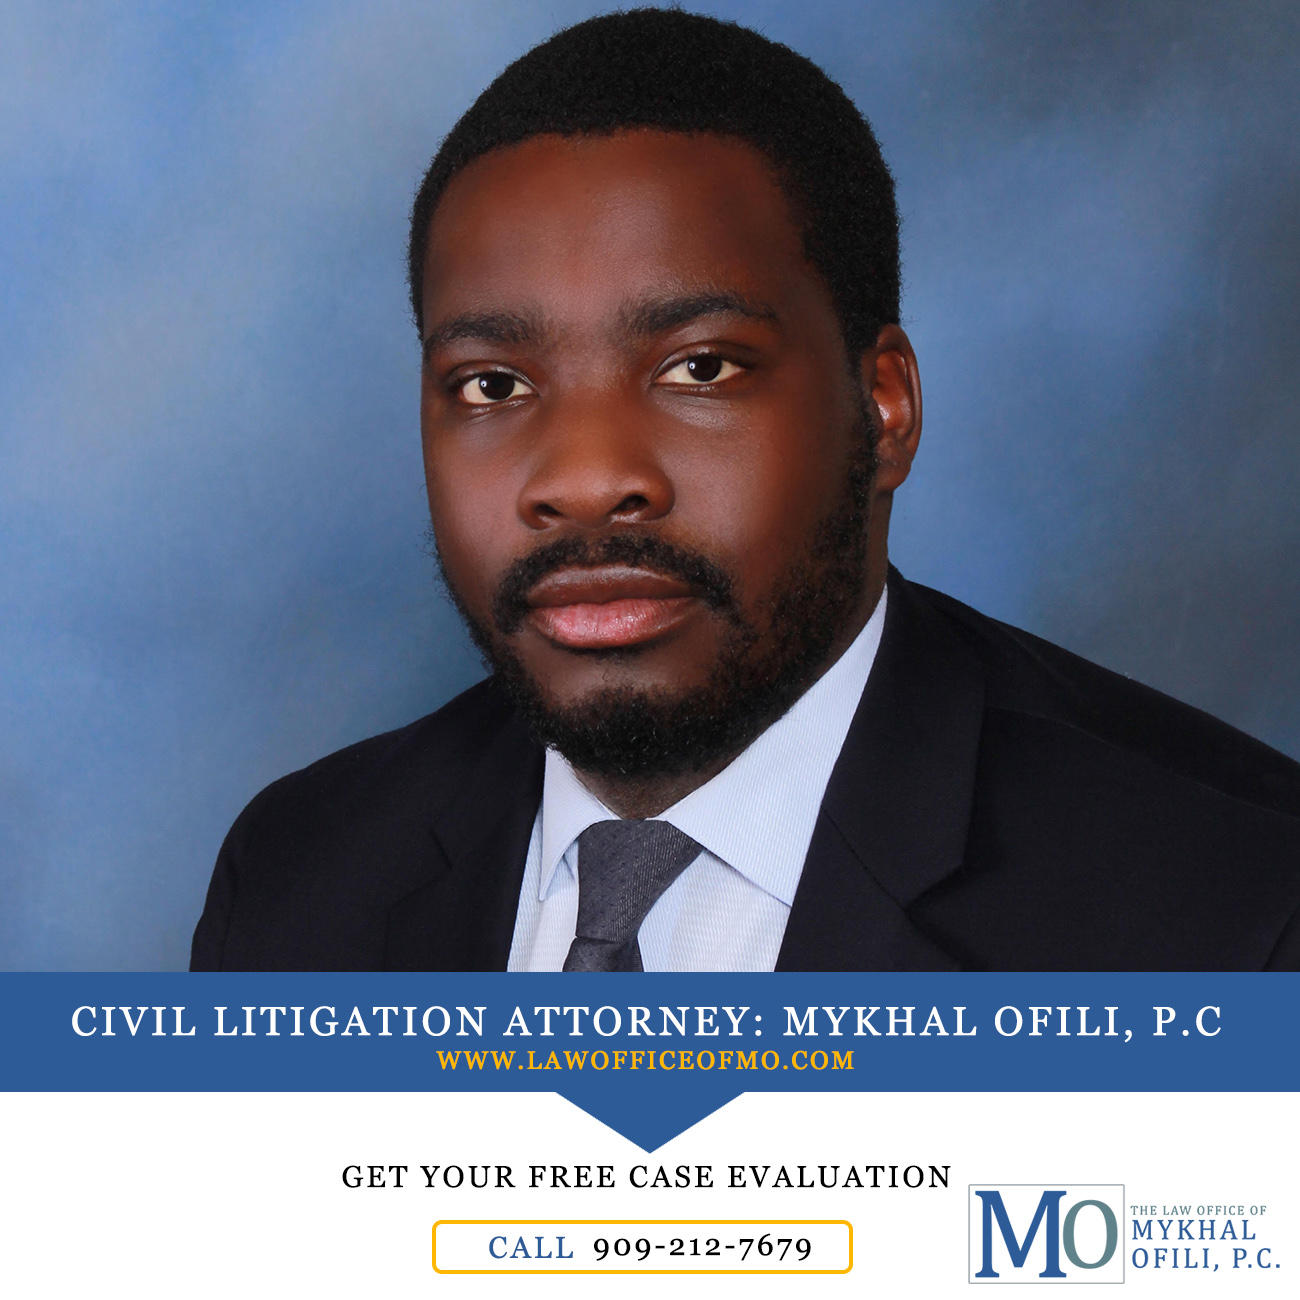 The Law Office of Mykhal Ofili, P.C. Photo